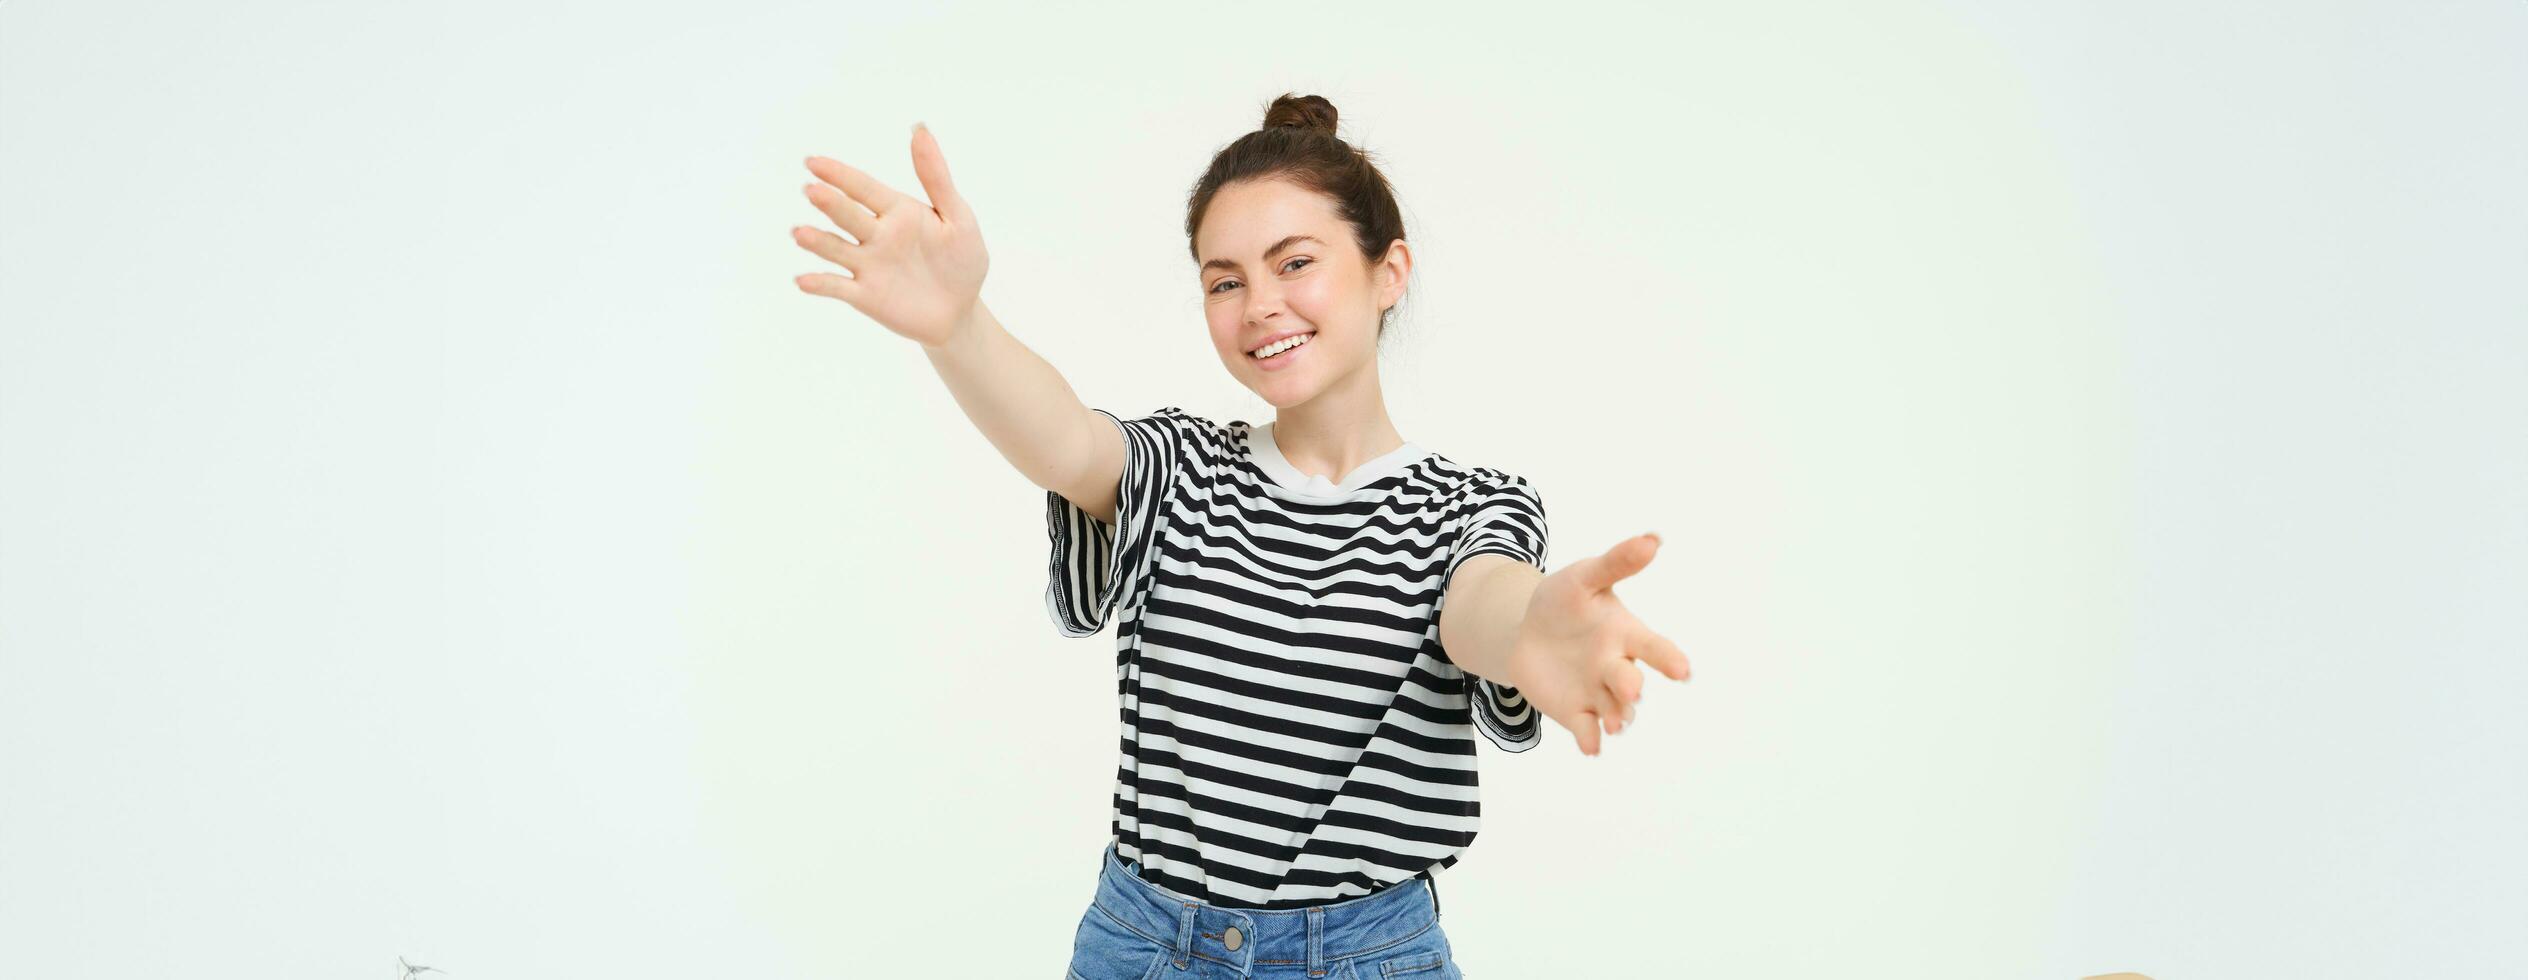 Portrait of cute smiling woman stretches her hands, reaches to hold something, wants to hug you, standing over white background photo